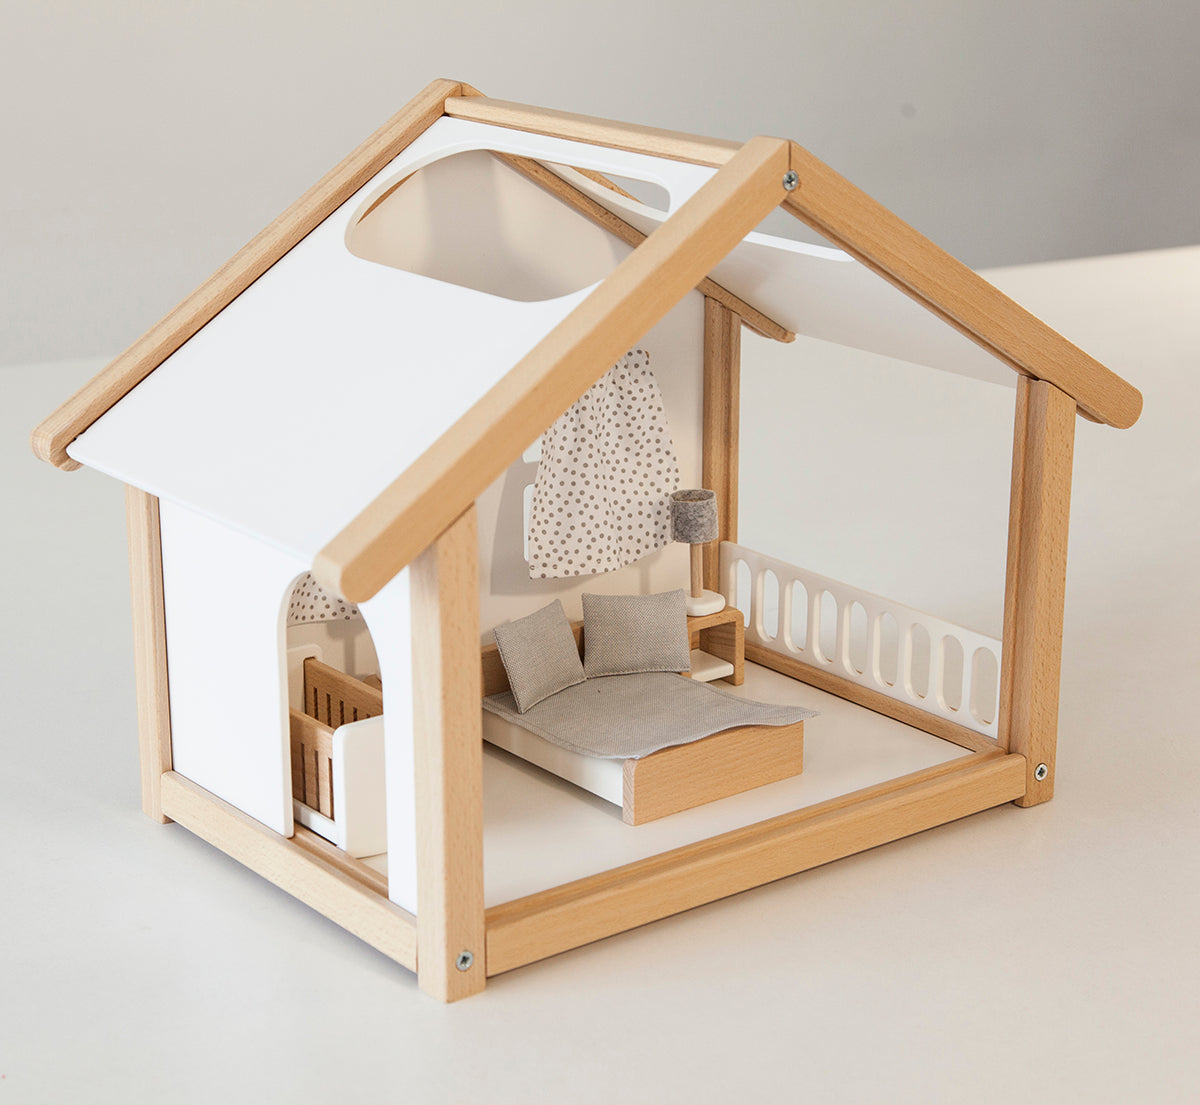 Small Wooden Dollhouse